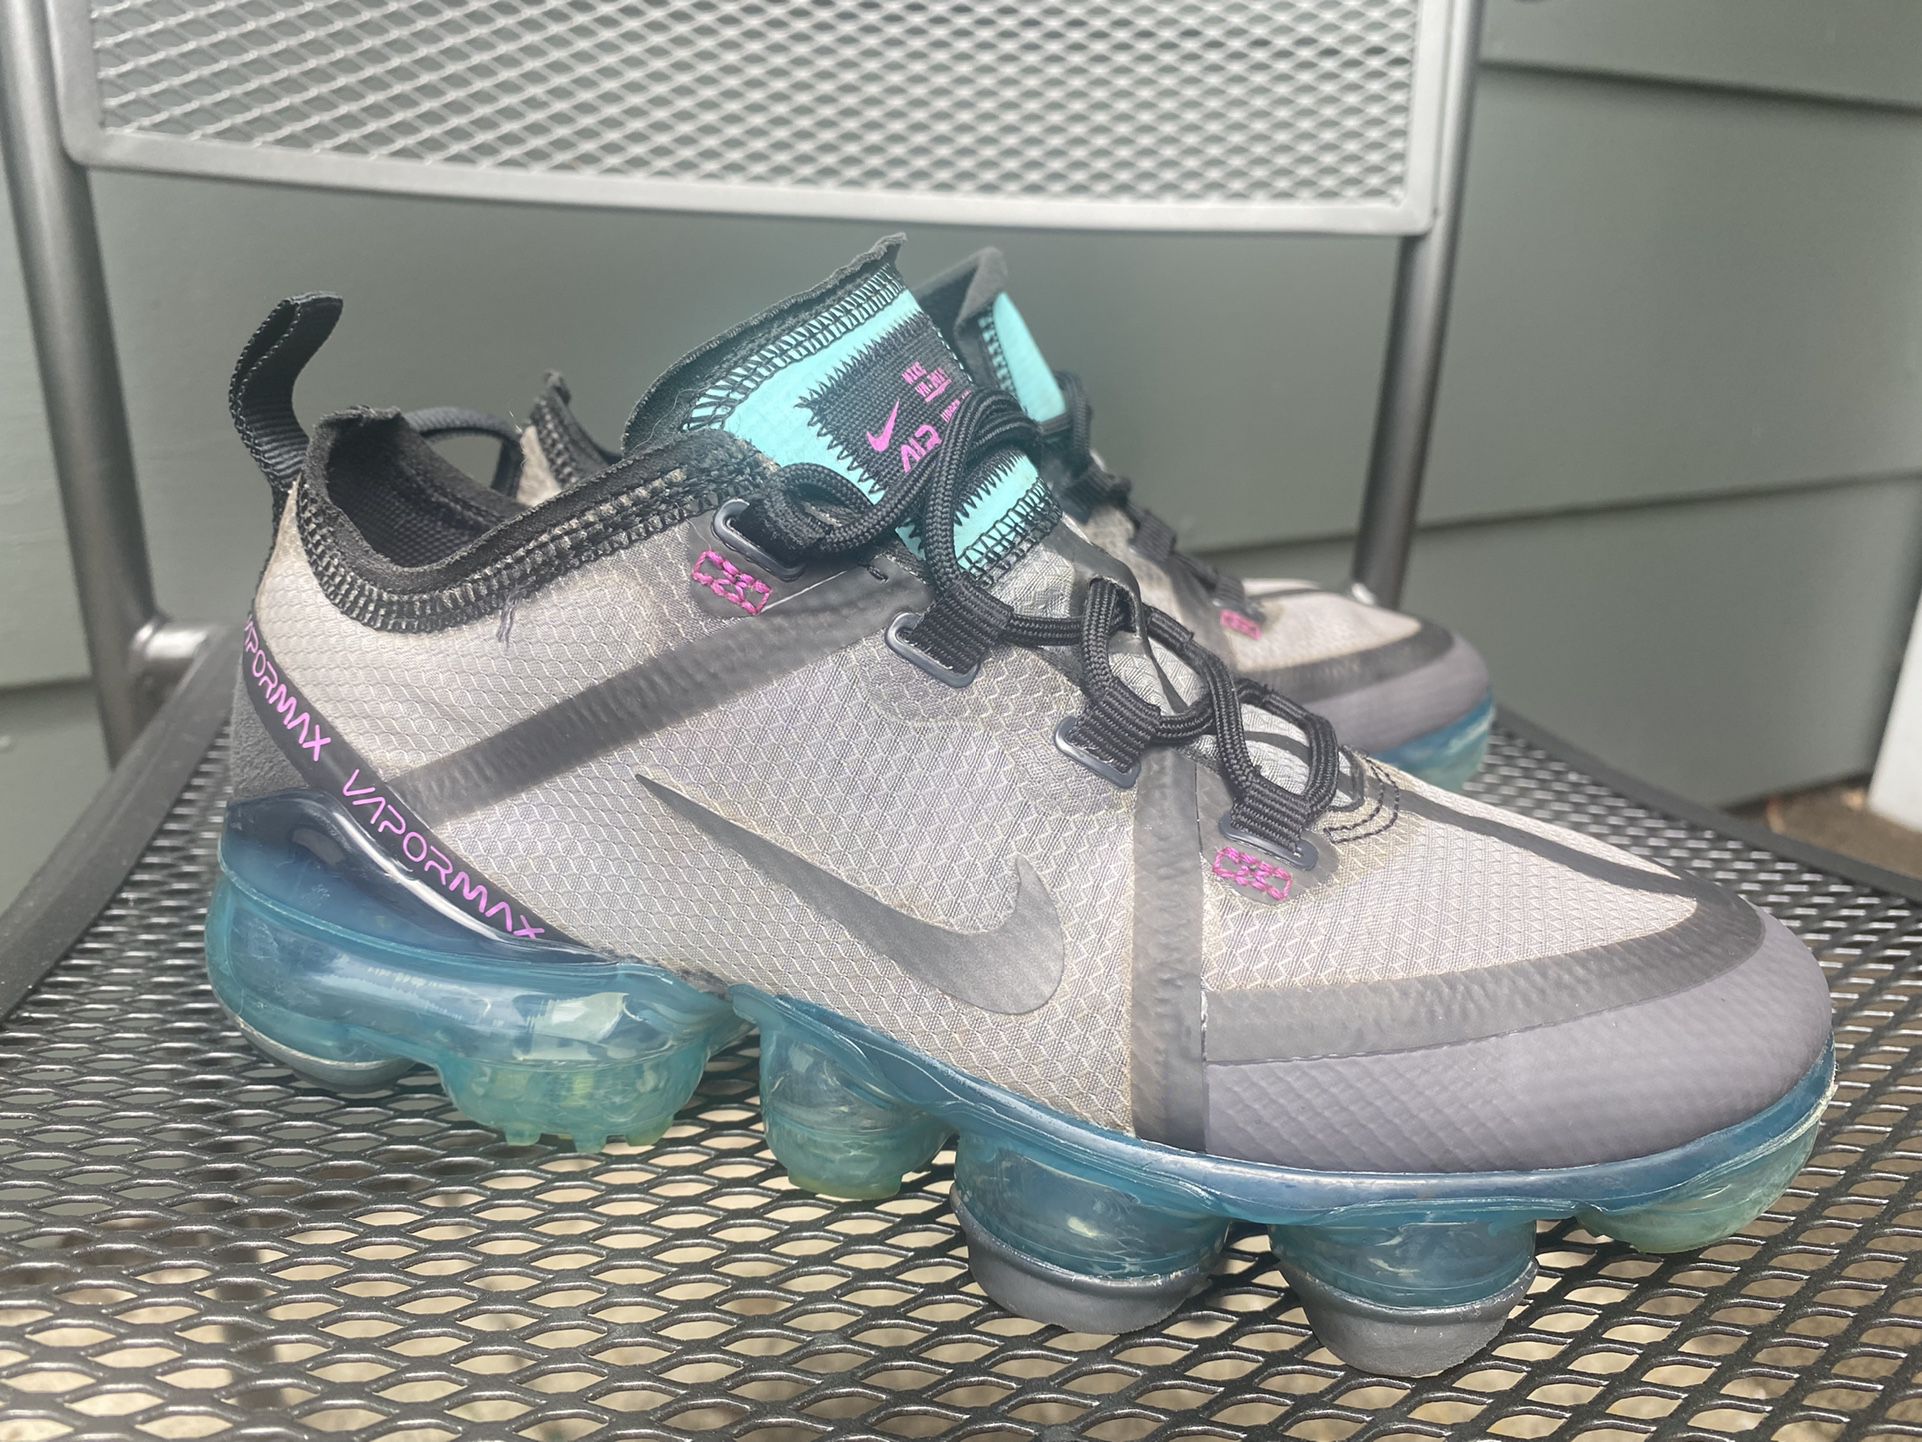 hobby Poging Maan oppervlakte Nike Vapormax 2019 Big Kids 3.5 for Sale in Portland, OR - OfferUp